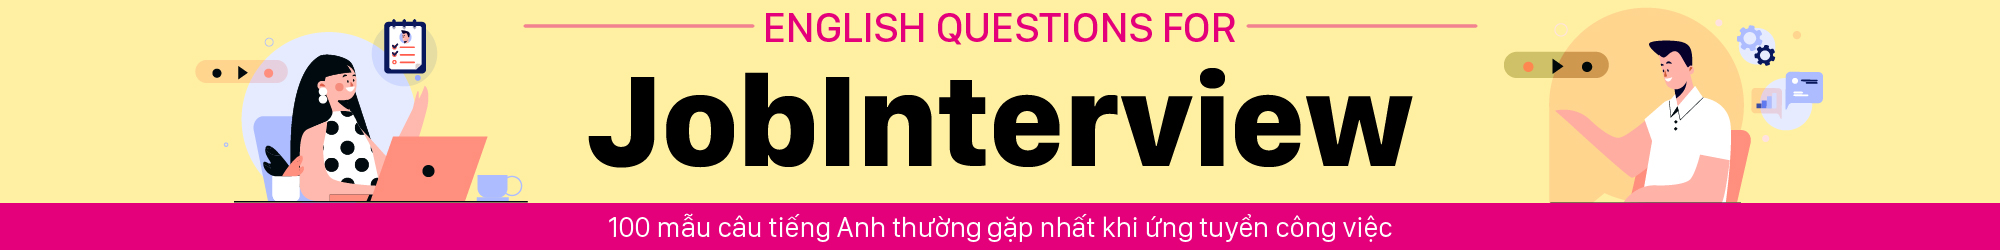 ENGLISH QUESTIONS FOR JOB INTERVIEW banner